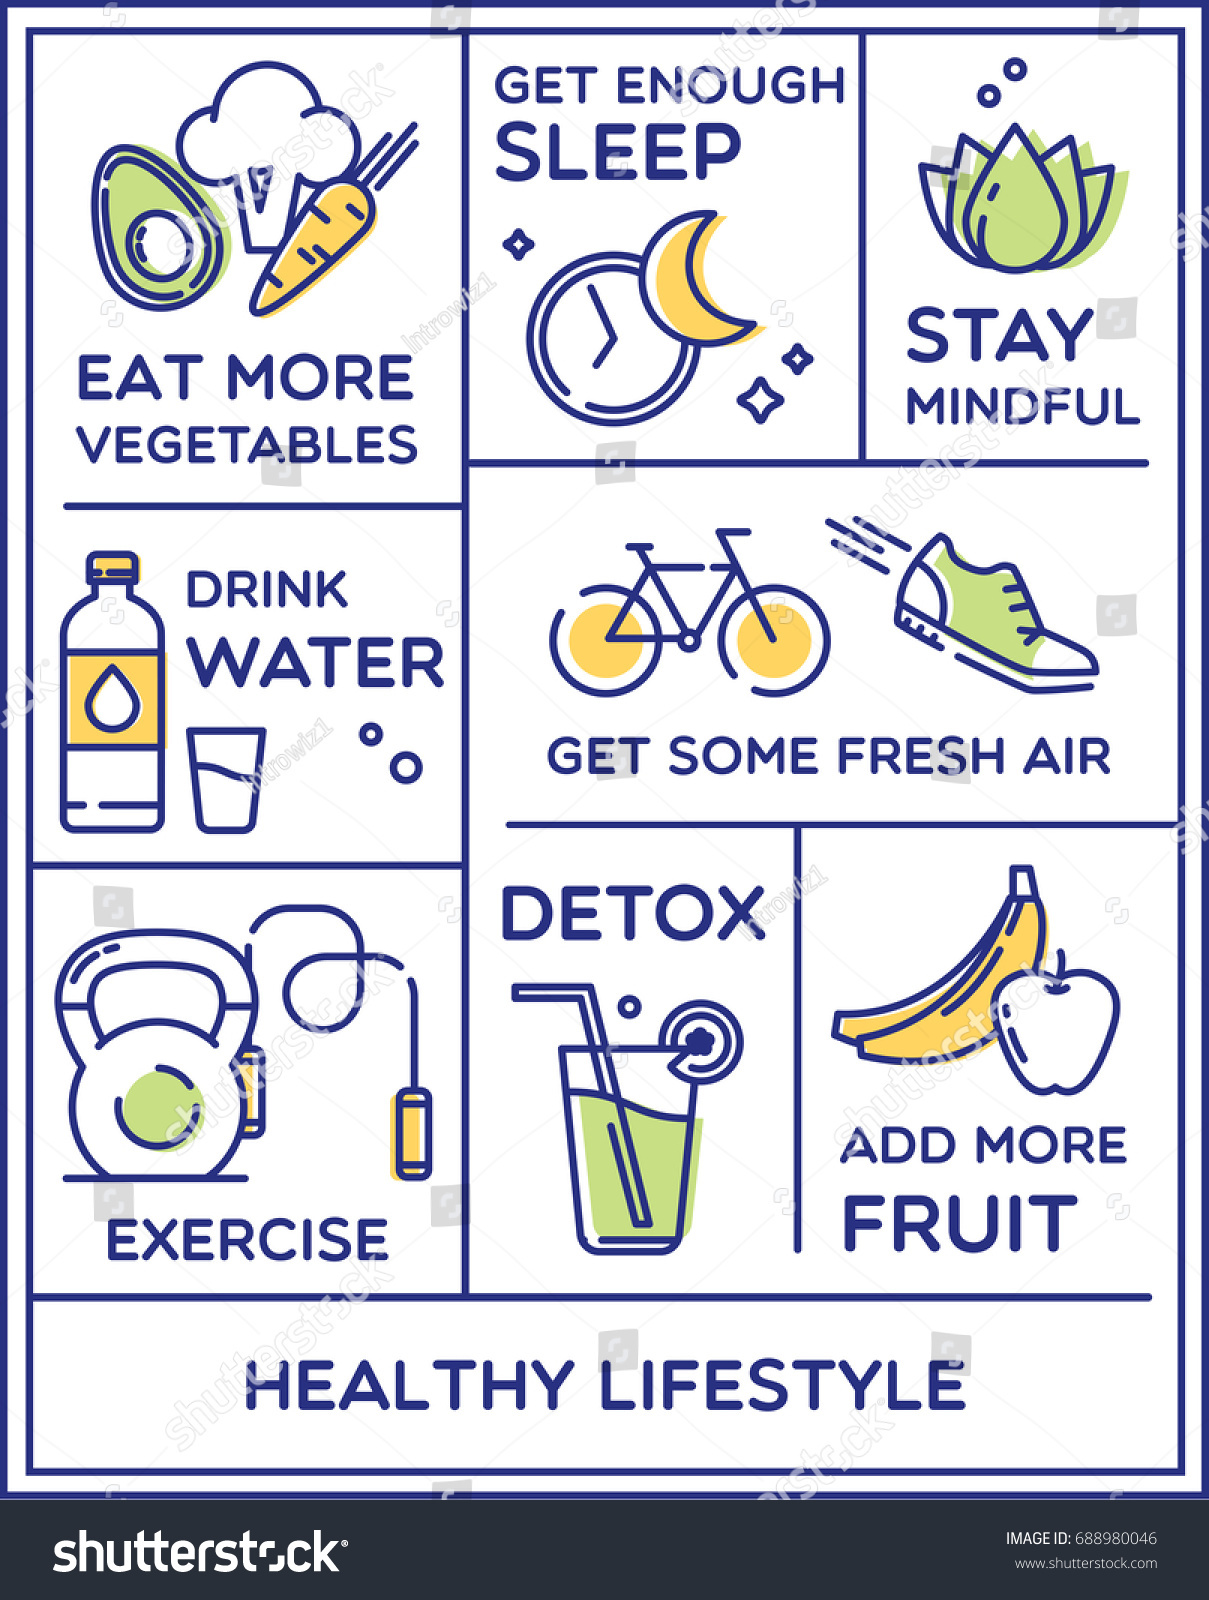 SVG of Healthy lifestyle poster, dieting, fitness and nutrition.
 svg